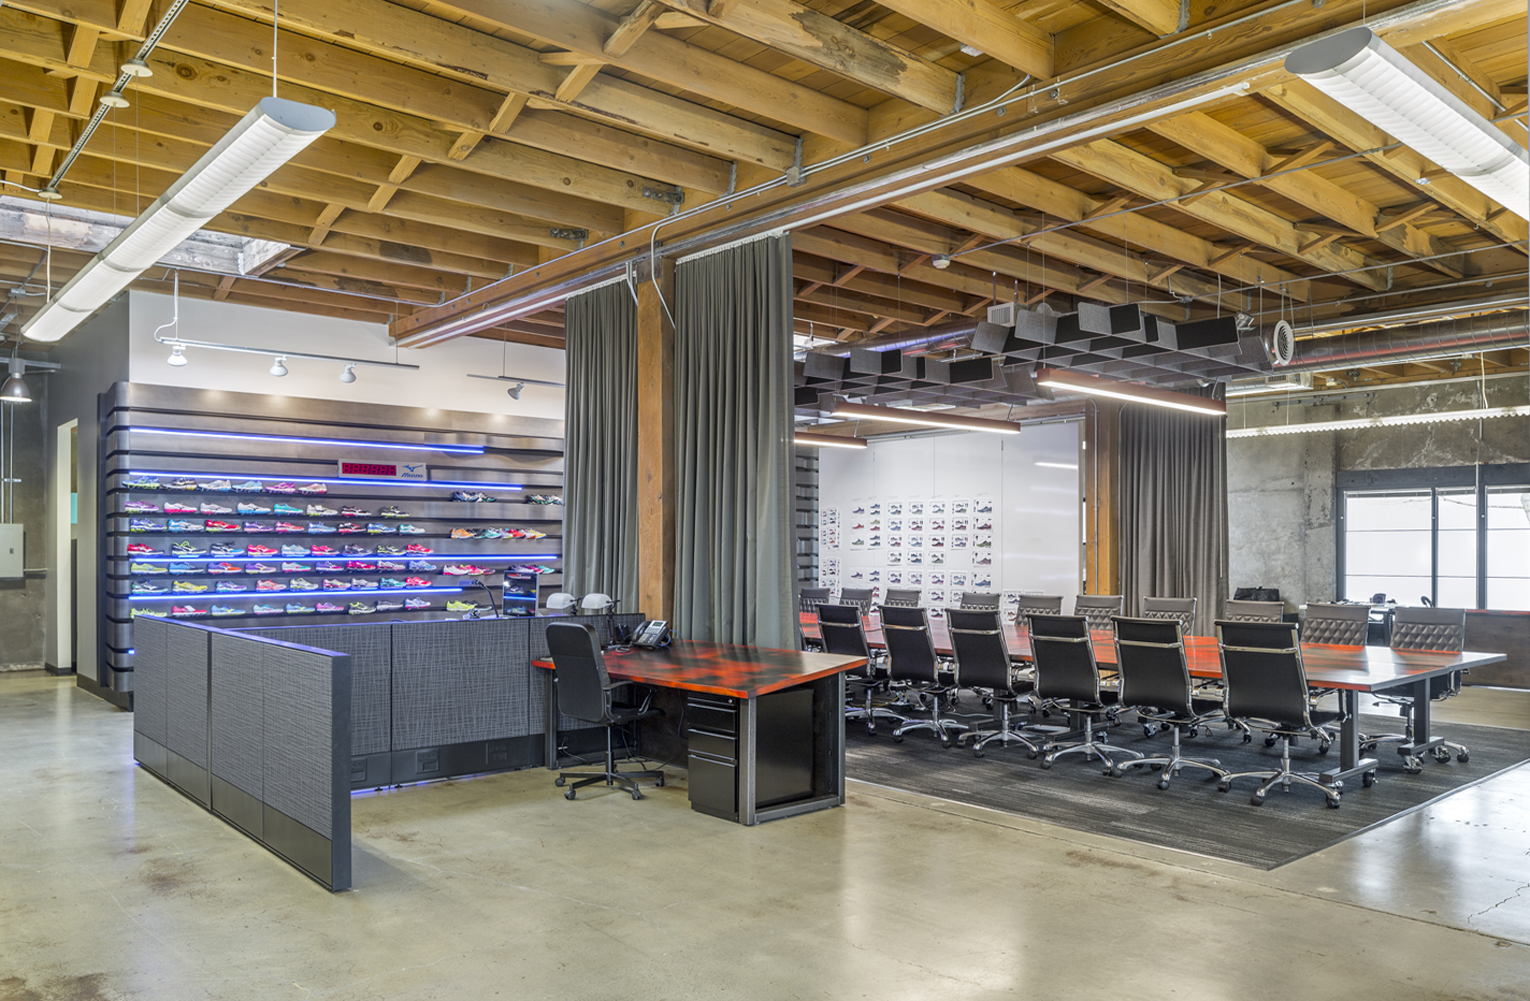 Mizuno Sozo Design Studio. A large, open office with concrete floors and an exposed wood truss ceiling features a reception desk with brightly-colored prototypes of running shoes on display in the background. A large conference table with chairs is flanked by floor-to-ceiling curtains which can be pulled closed to surround the table to create a private conference room.